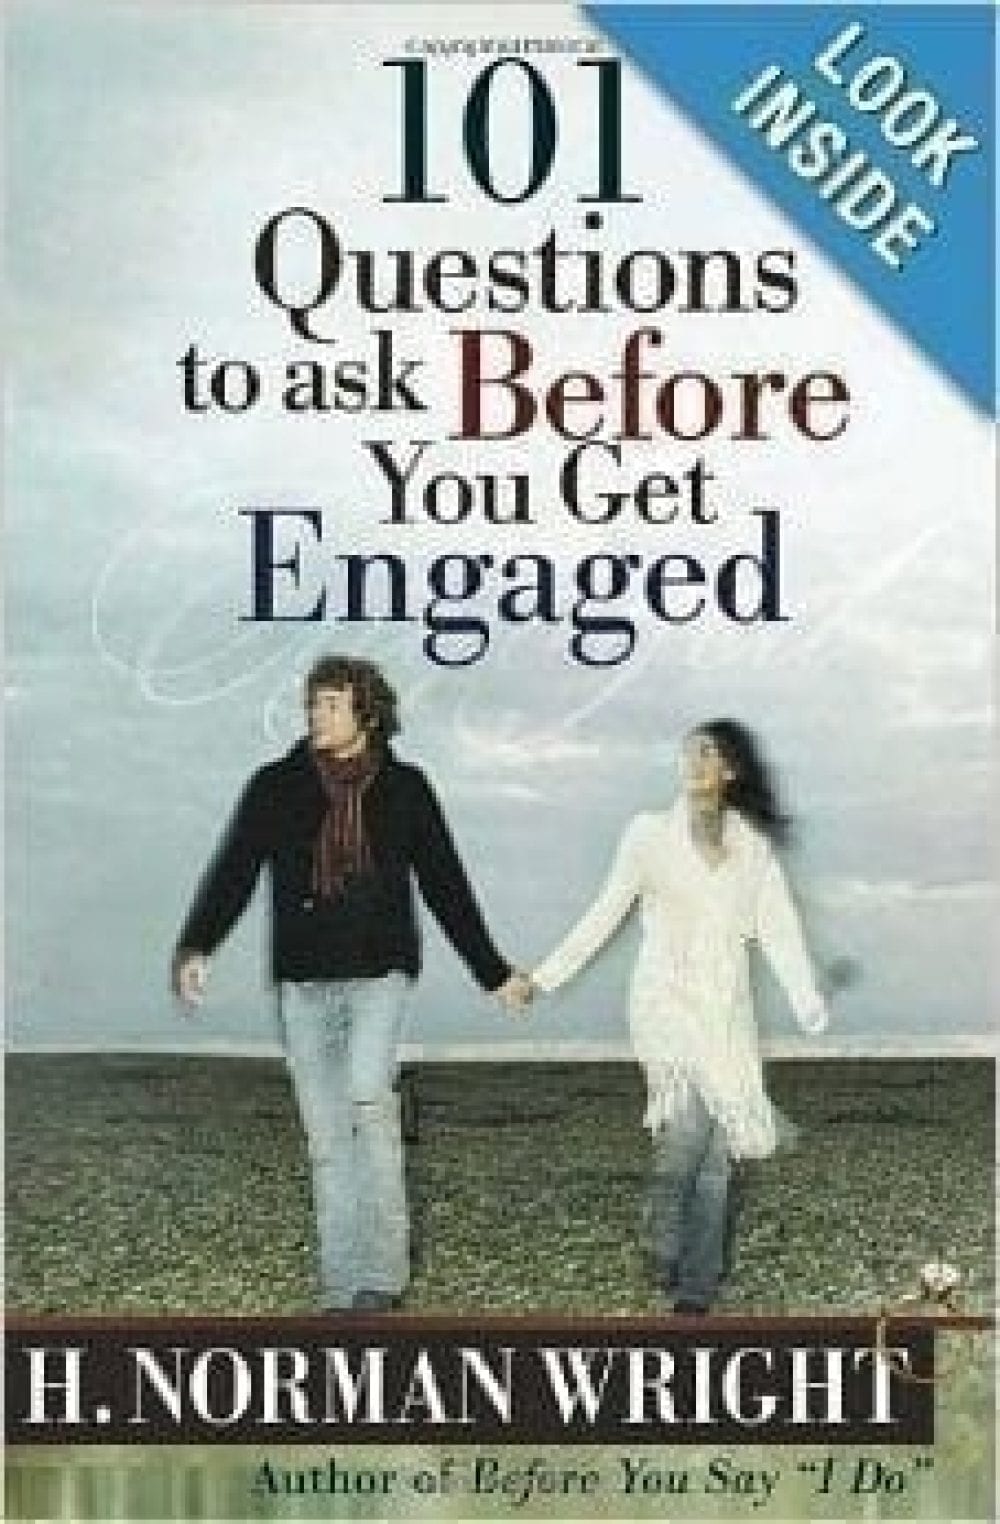 101 Questions to ask BEFORE you get engaged